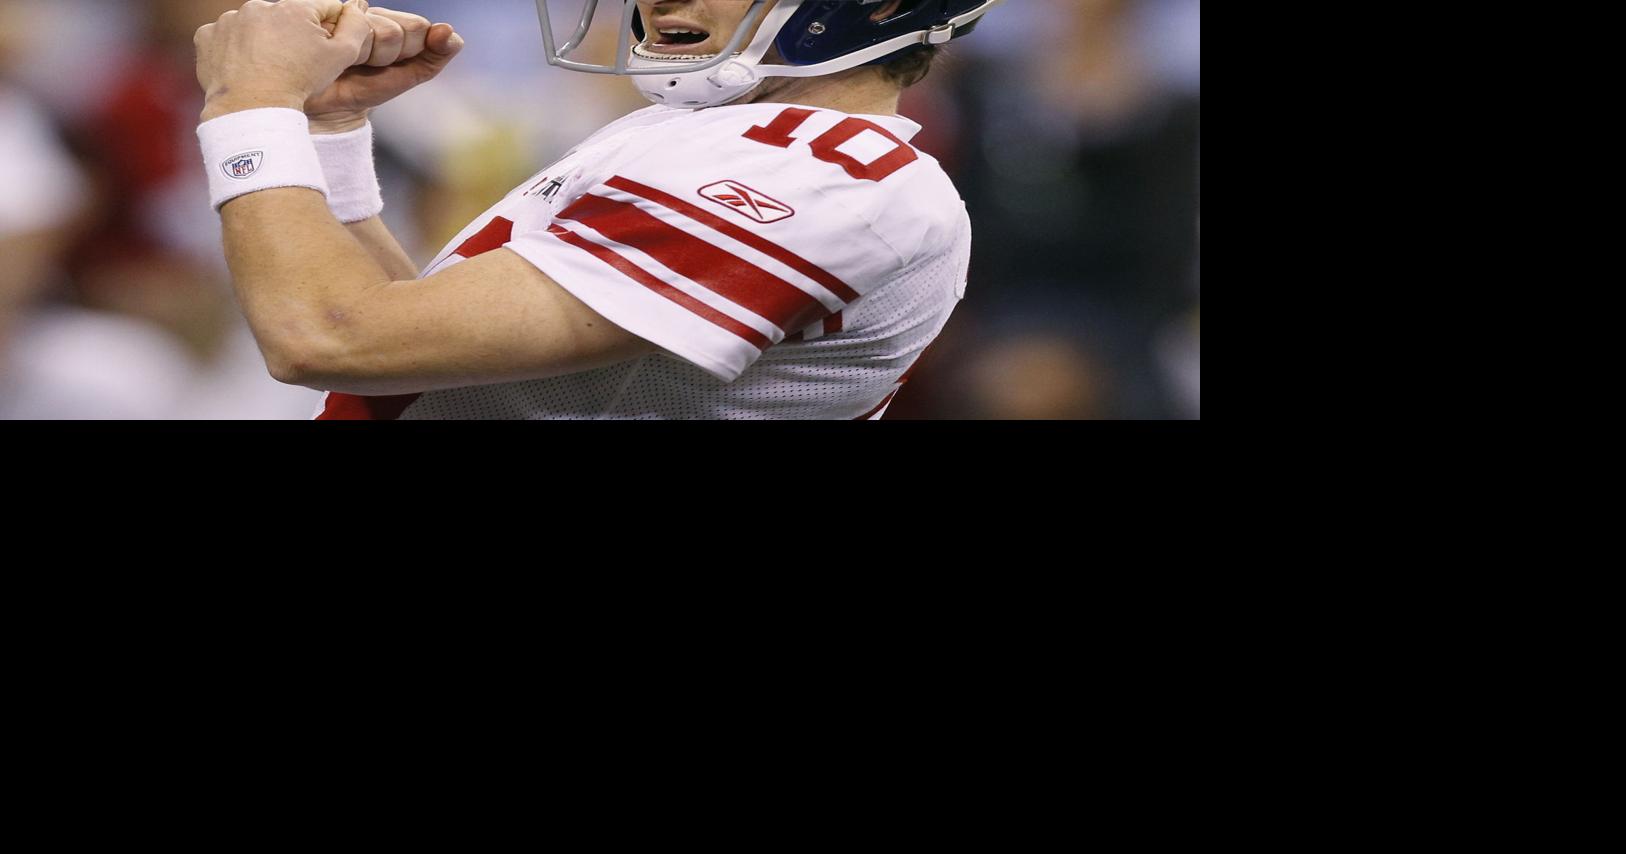 Super Bowl 46 links: Eli Manning of New York Giants catches up